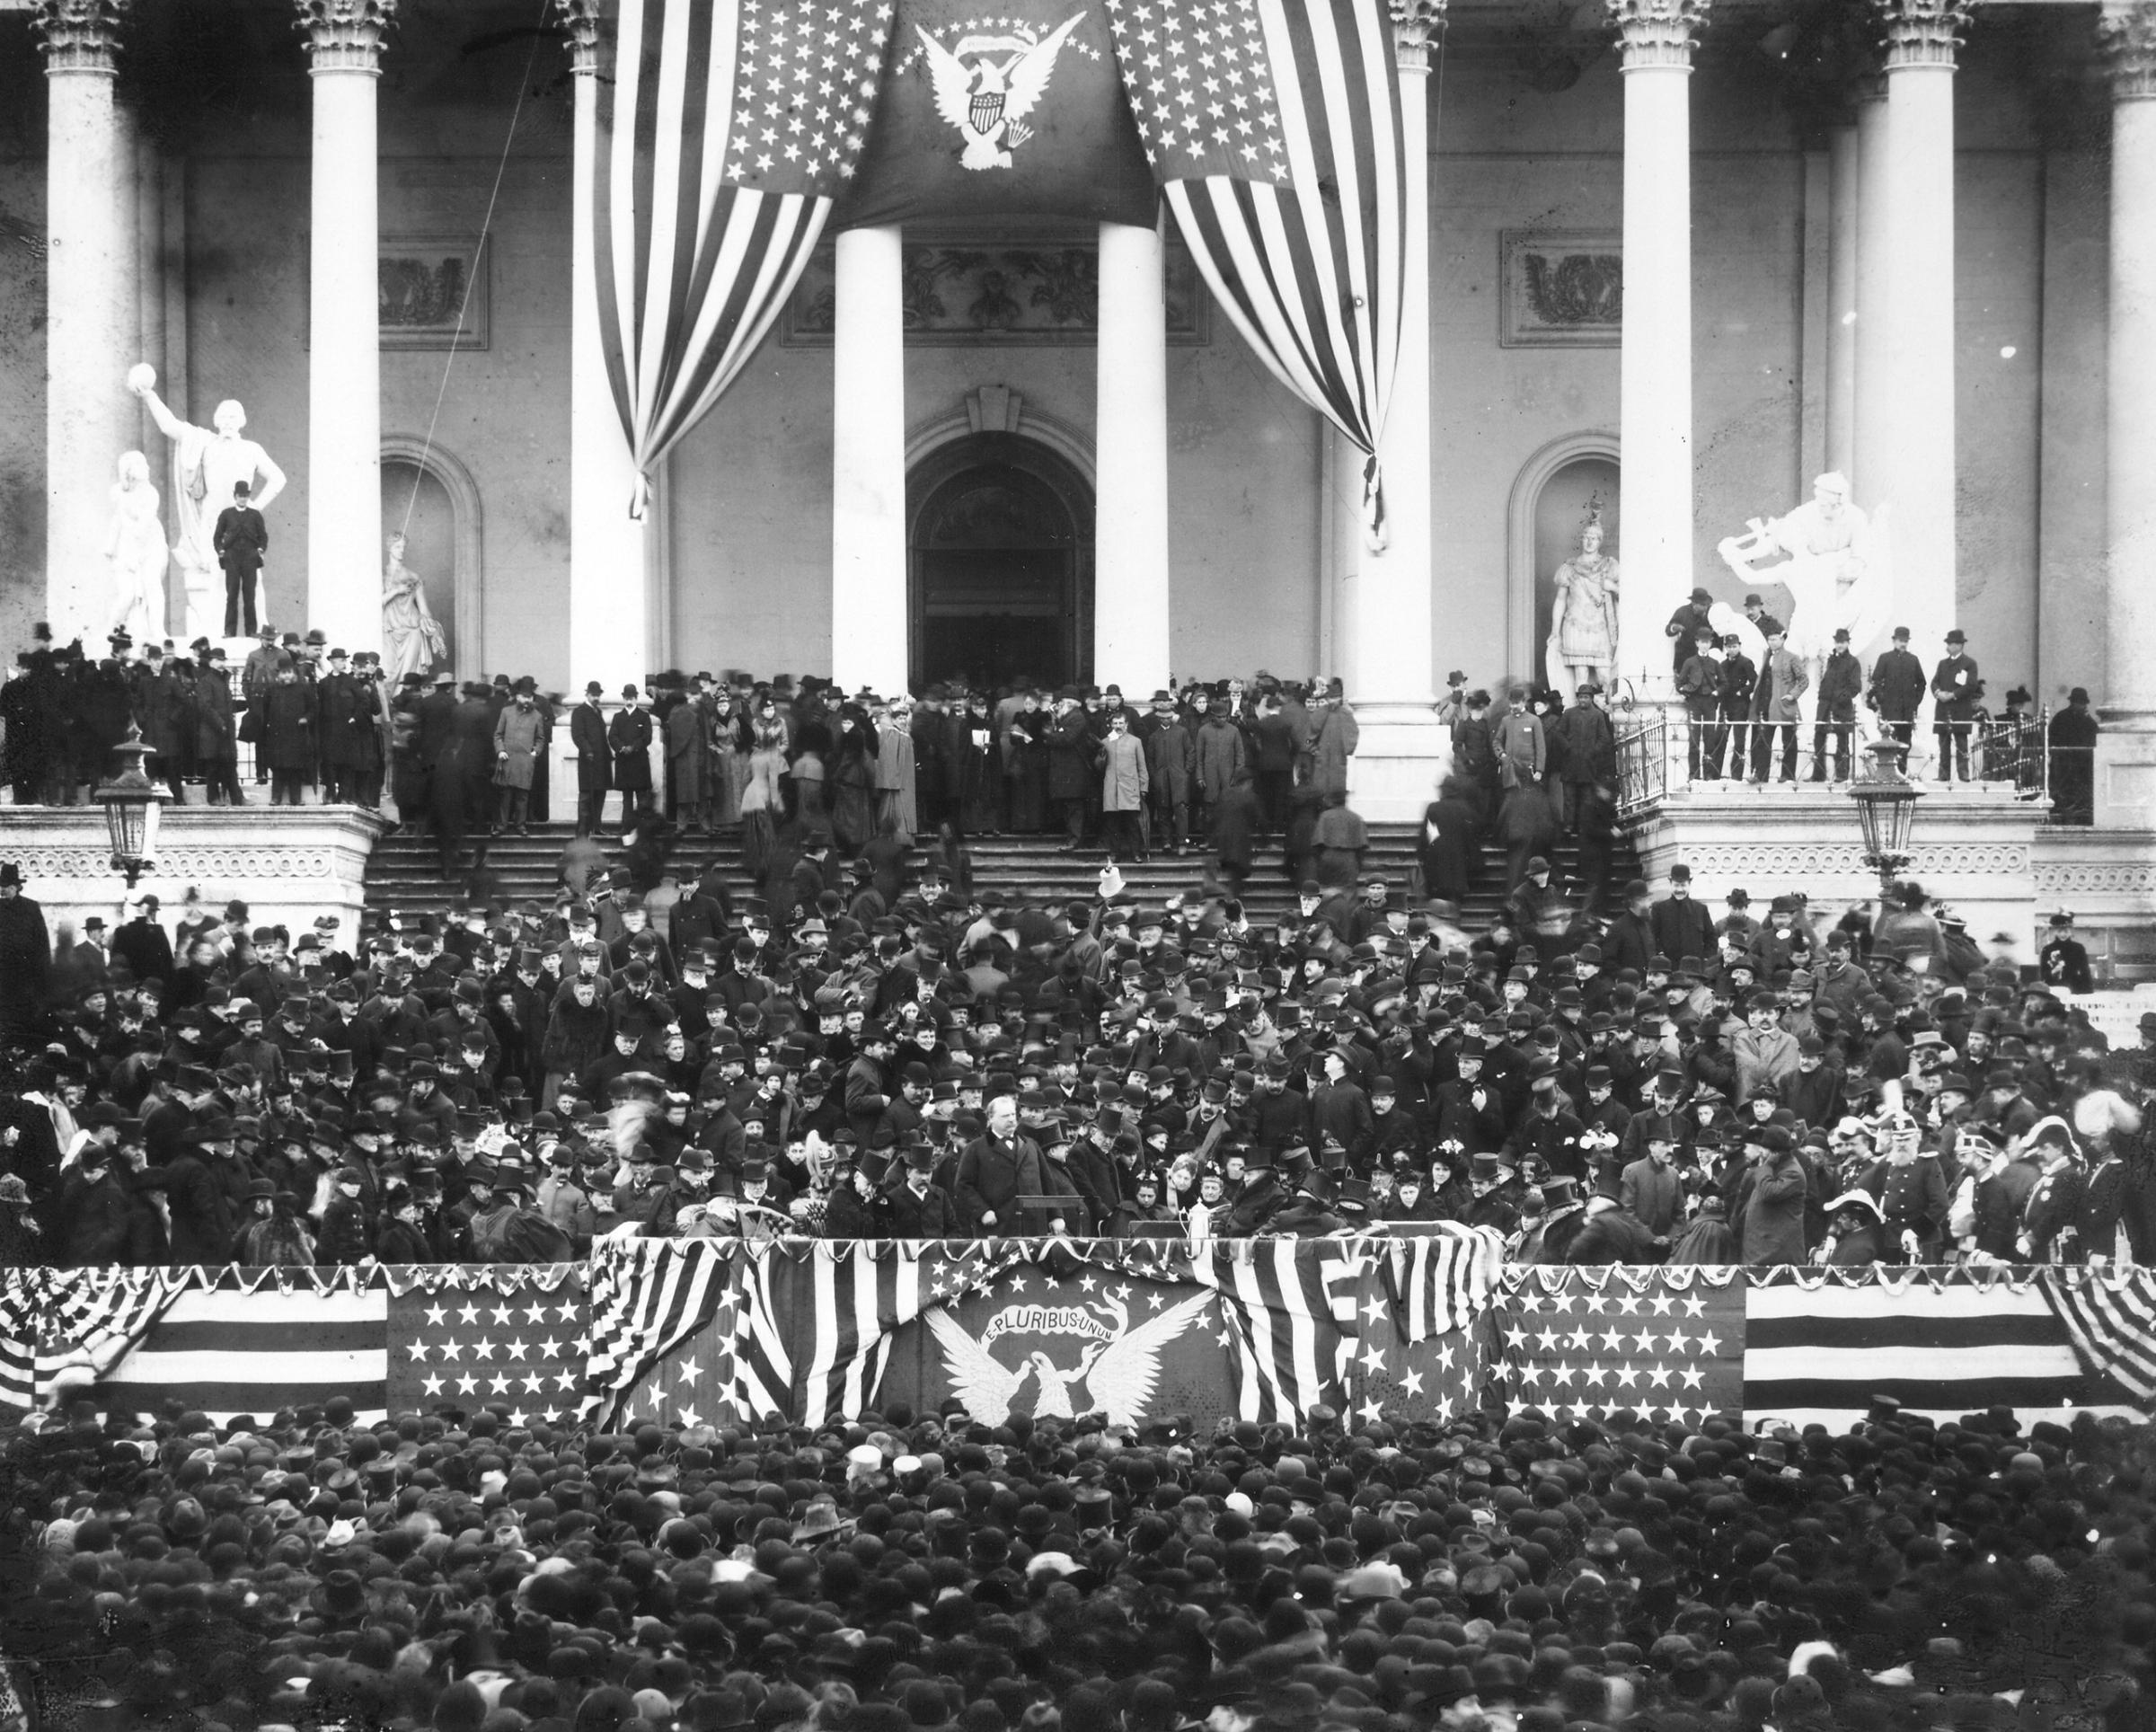 Grover Cleveland's second inauguration, 1893.